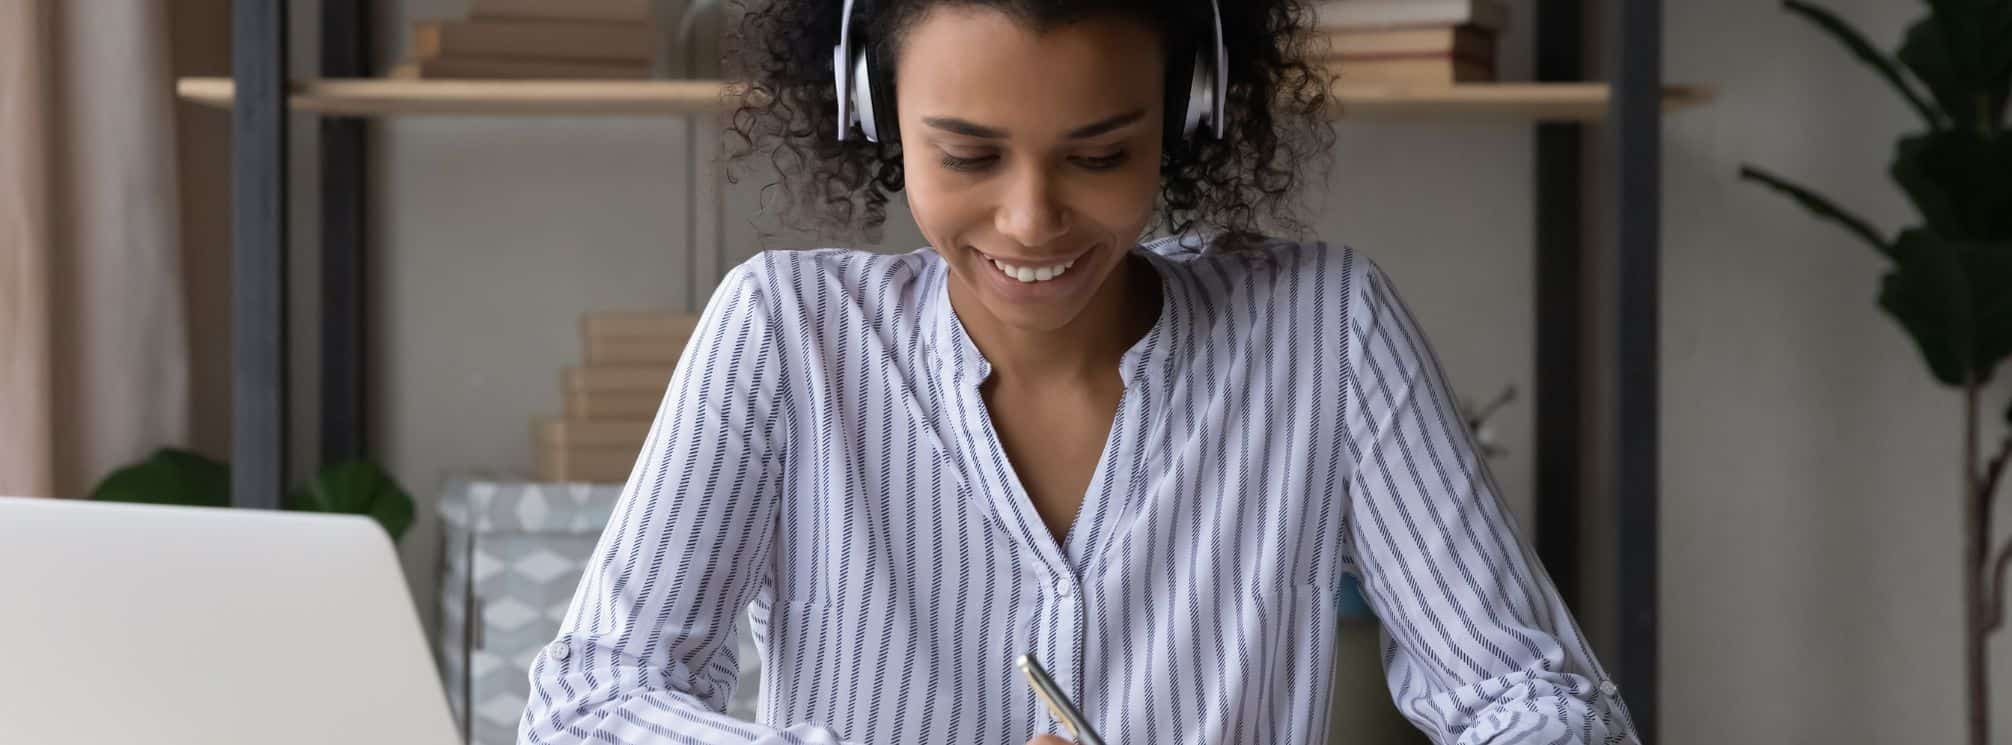 photo of a remote employee who is engaged and smiling while she's working at home